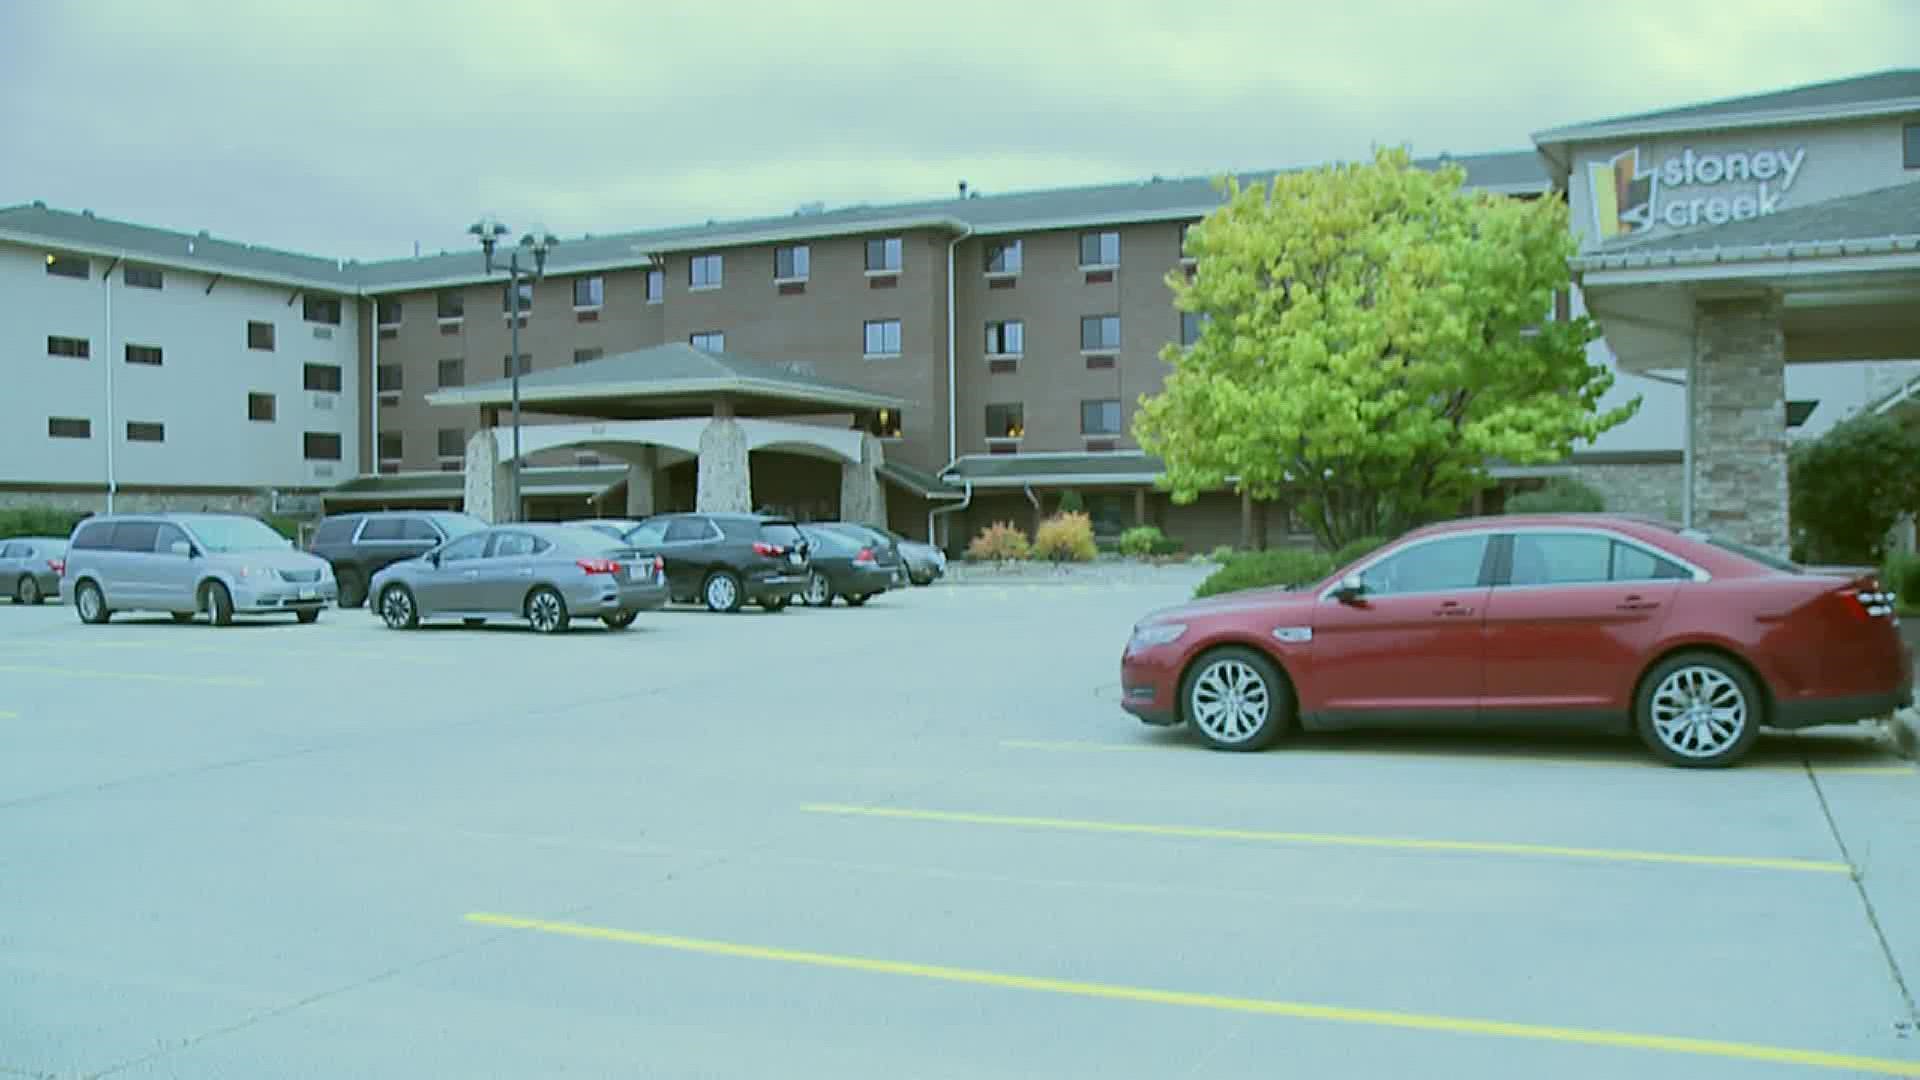 Managers at Stoney Creek Hotel in Moline told News 8 that the UAW is holding meetings at their location.